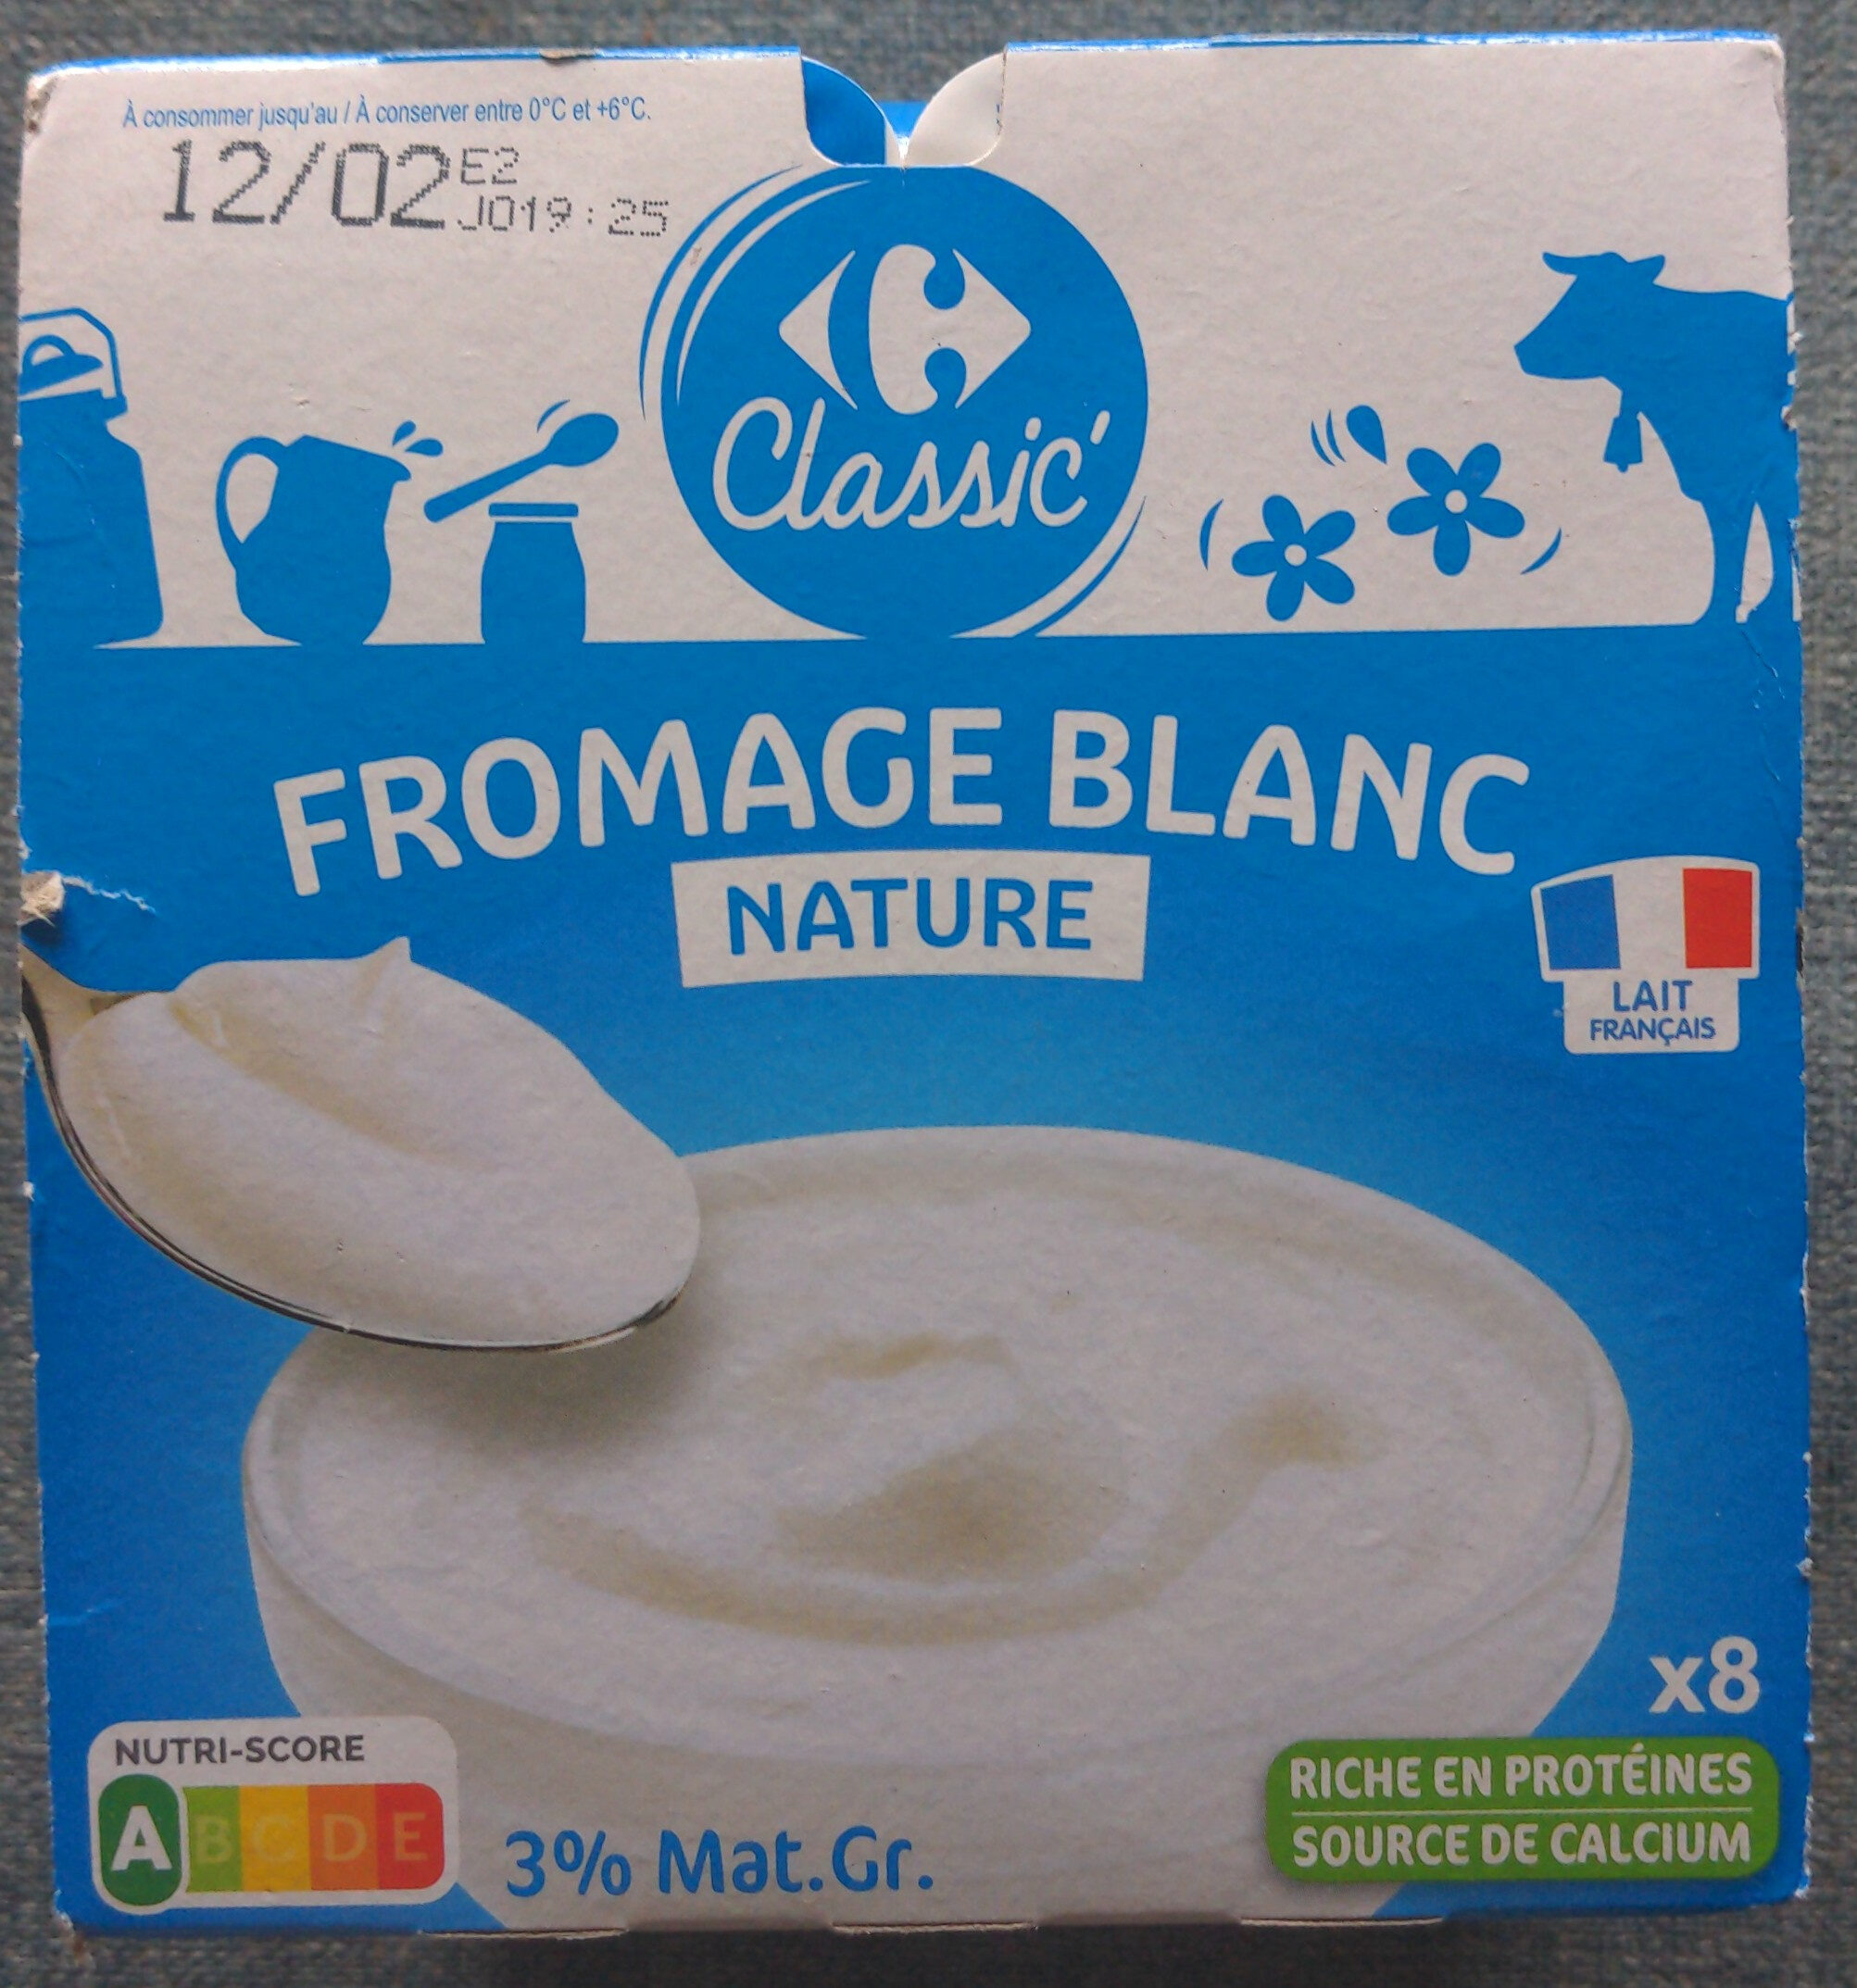 Fromage blanc nature - Produkt - fr